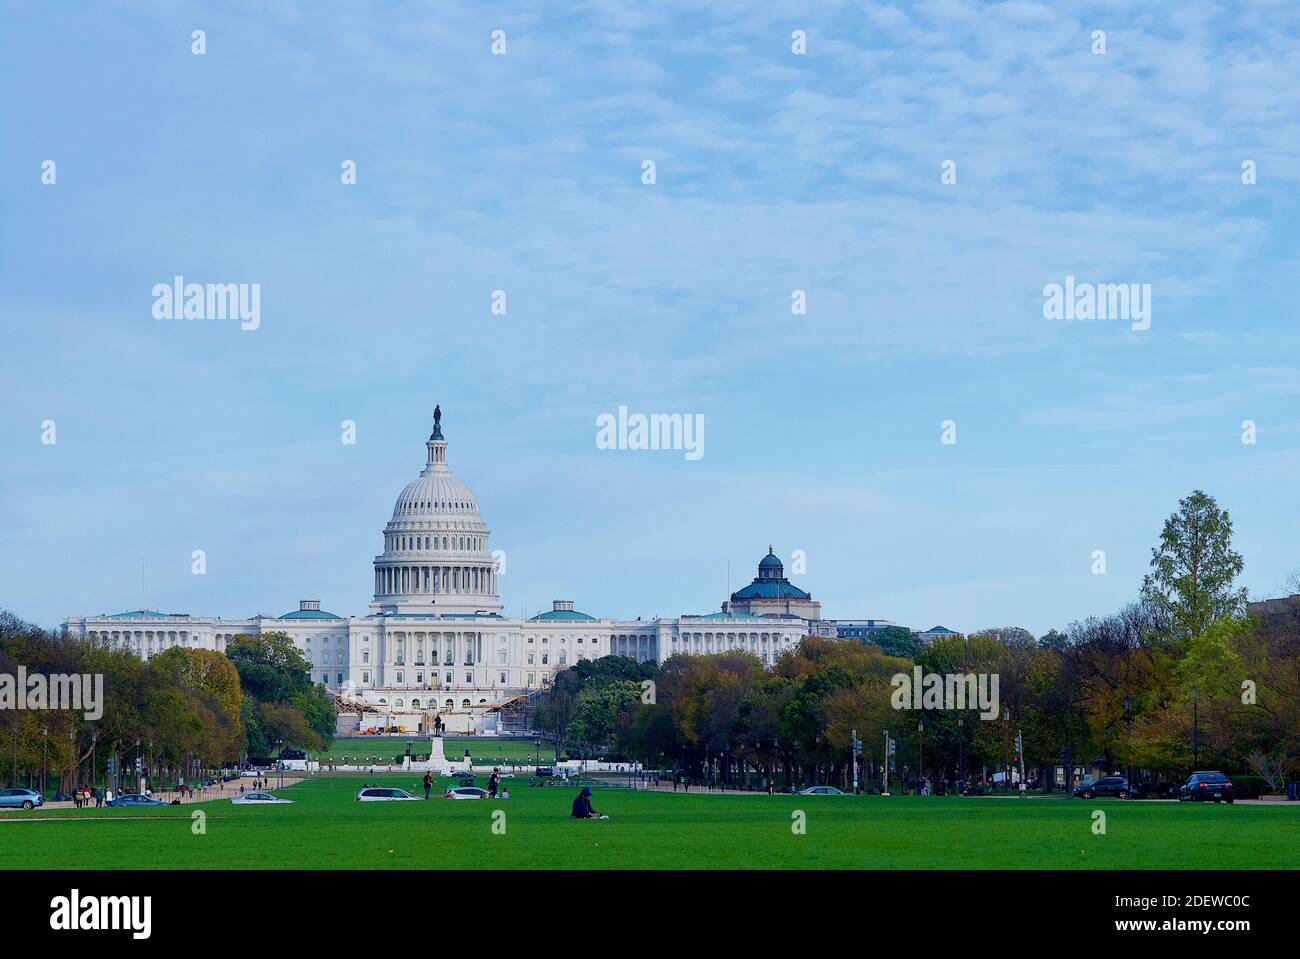 Washington, D.C. - November 3, 2020: Tourists enjoy an autumn afternoon on the National Mall with the U.S. Capitol building seen in the background. Stock Photo